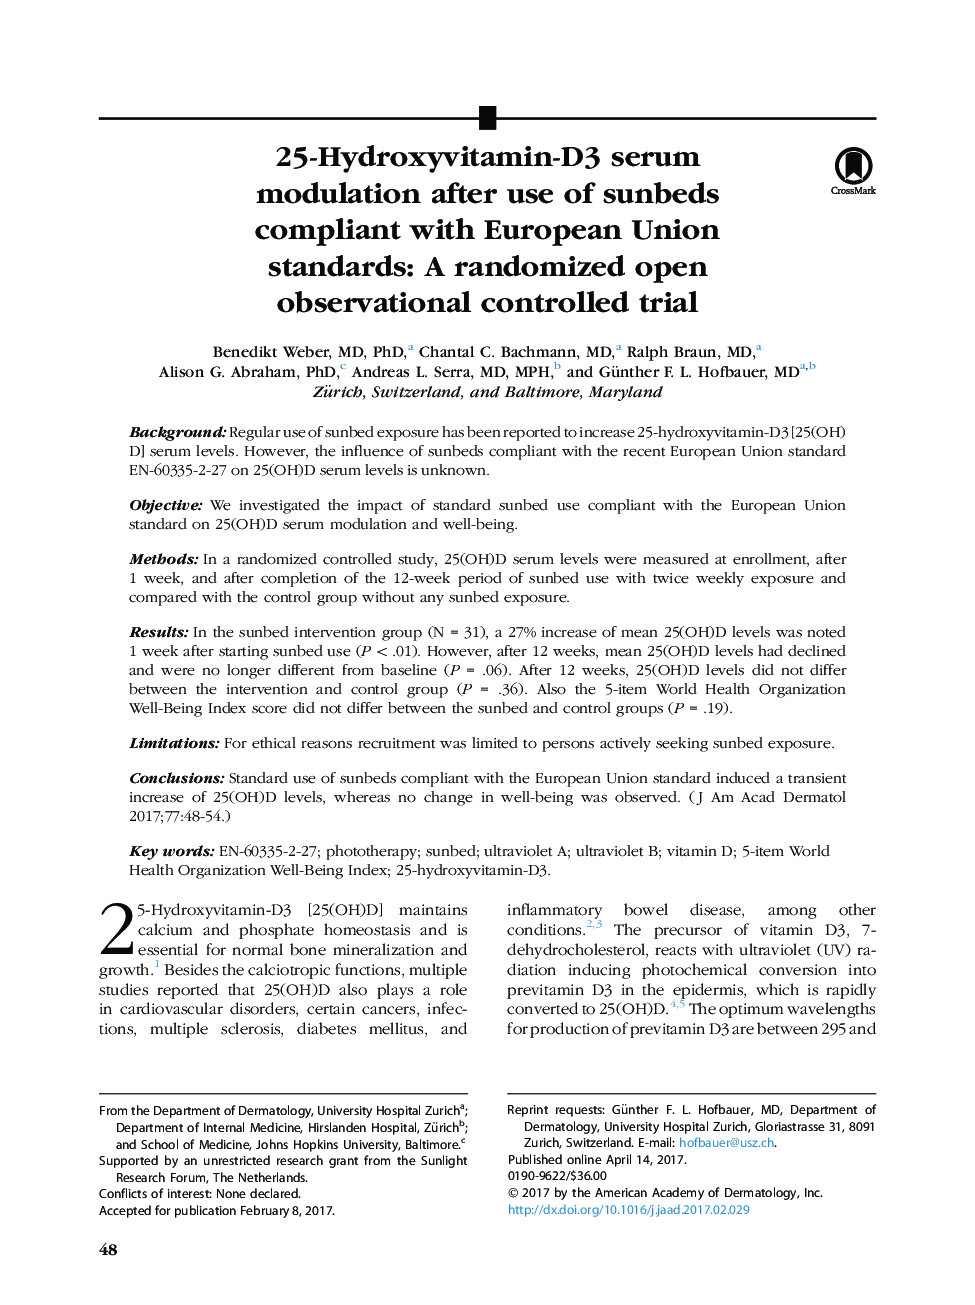 25-Hydroxyvitamin-D3 serum modulation after use of sunbeds compliant with European Union standards: A randomized open observational controlled trial